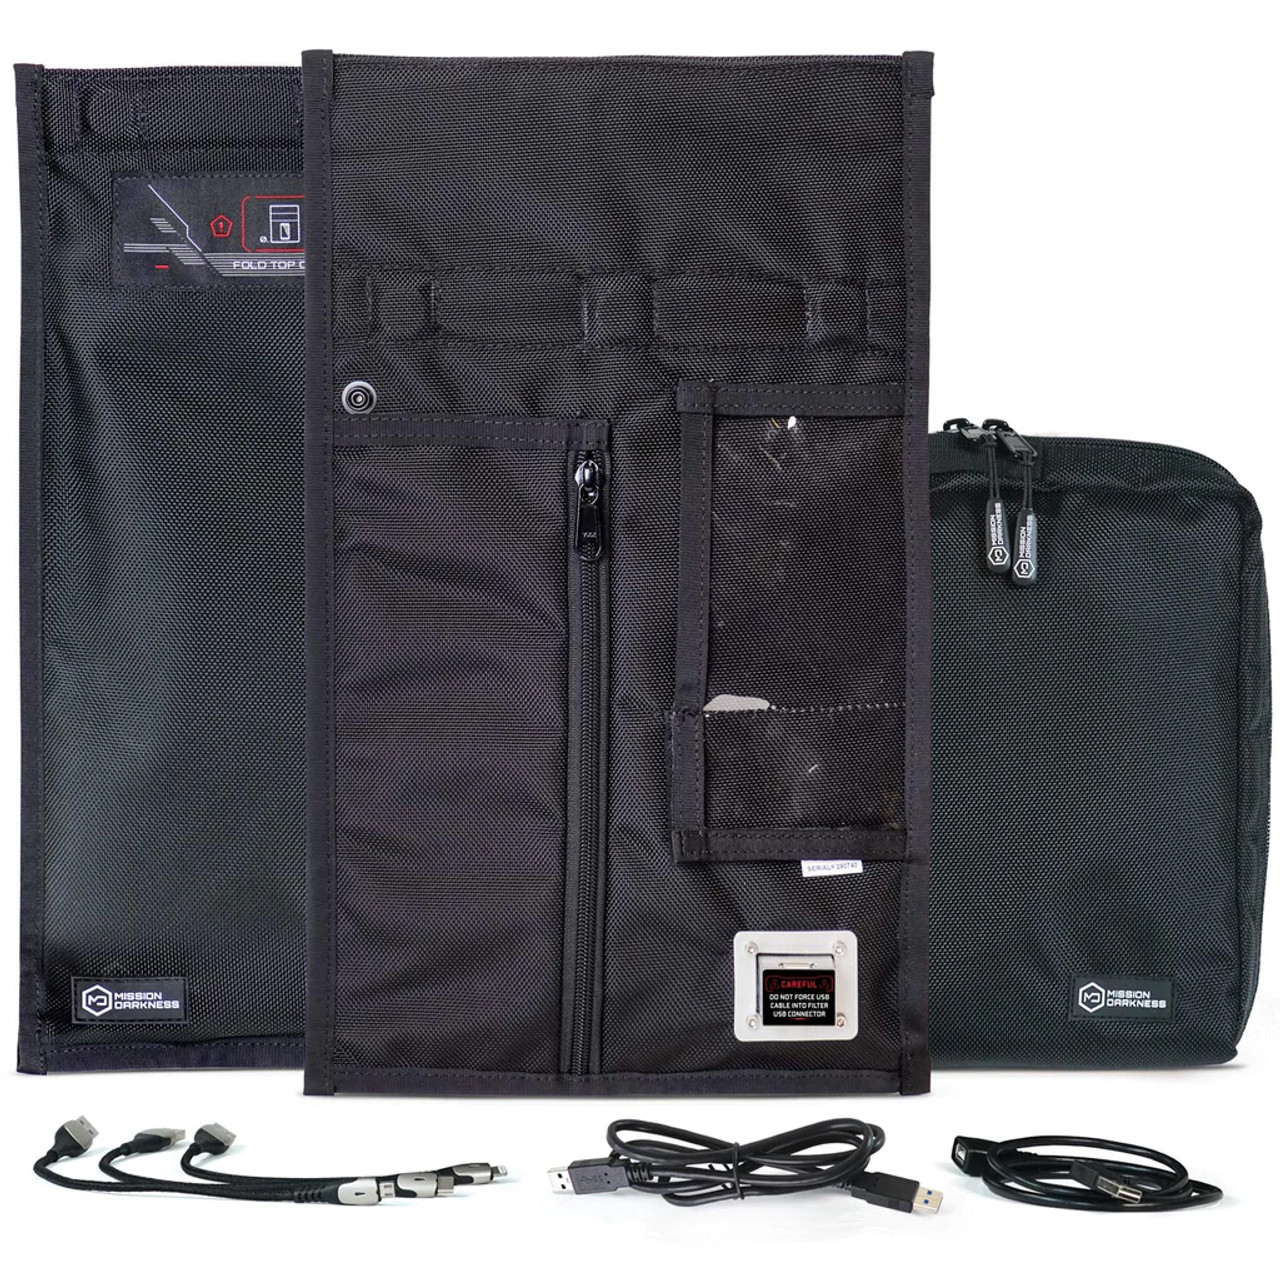 Mission Darkness™ Non-window Charge & Shield Faraday Tablet Bag